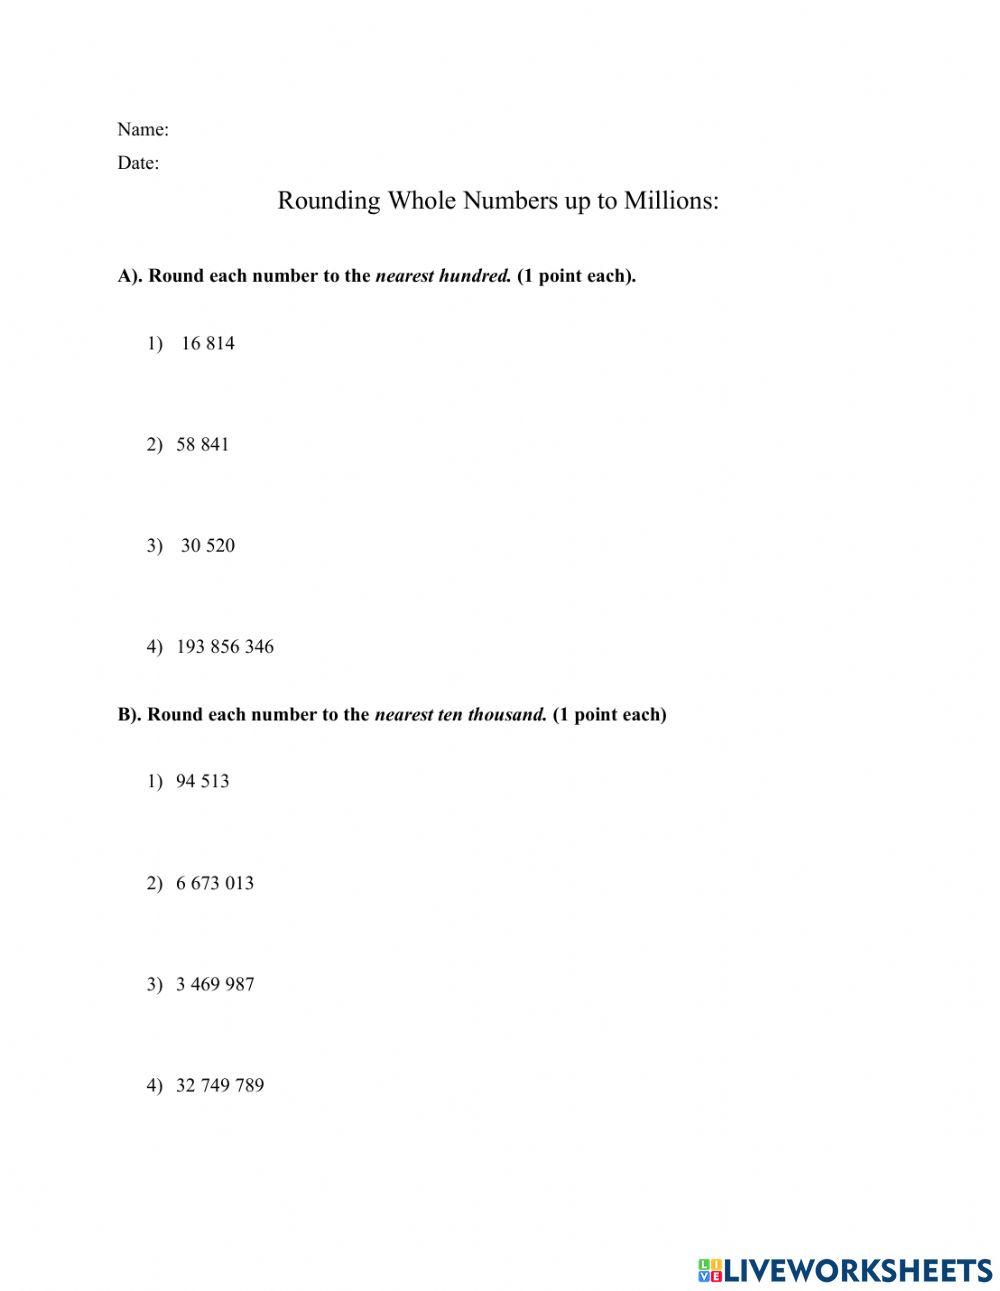 Rounding numbers to the nearest Millions